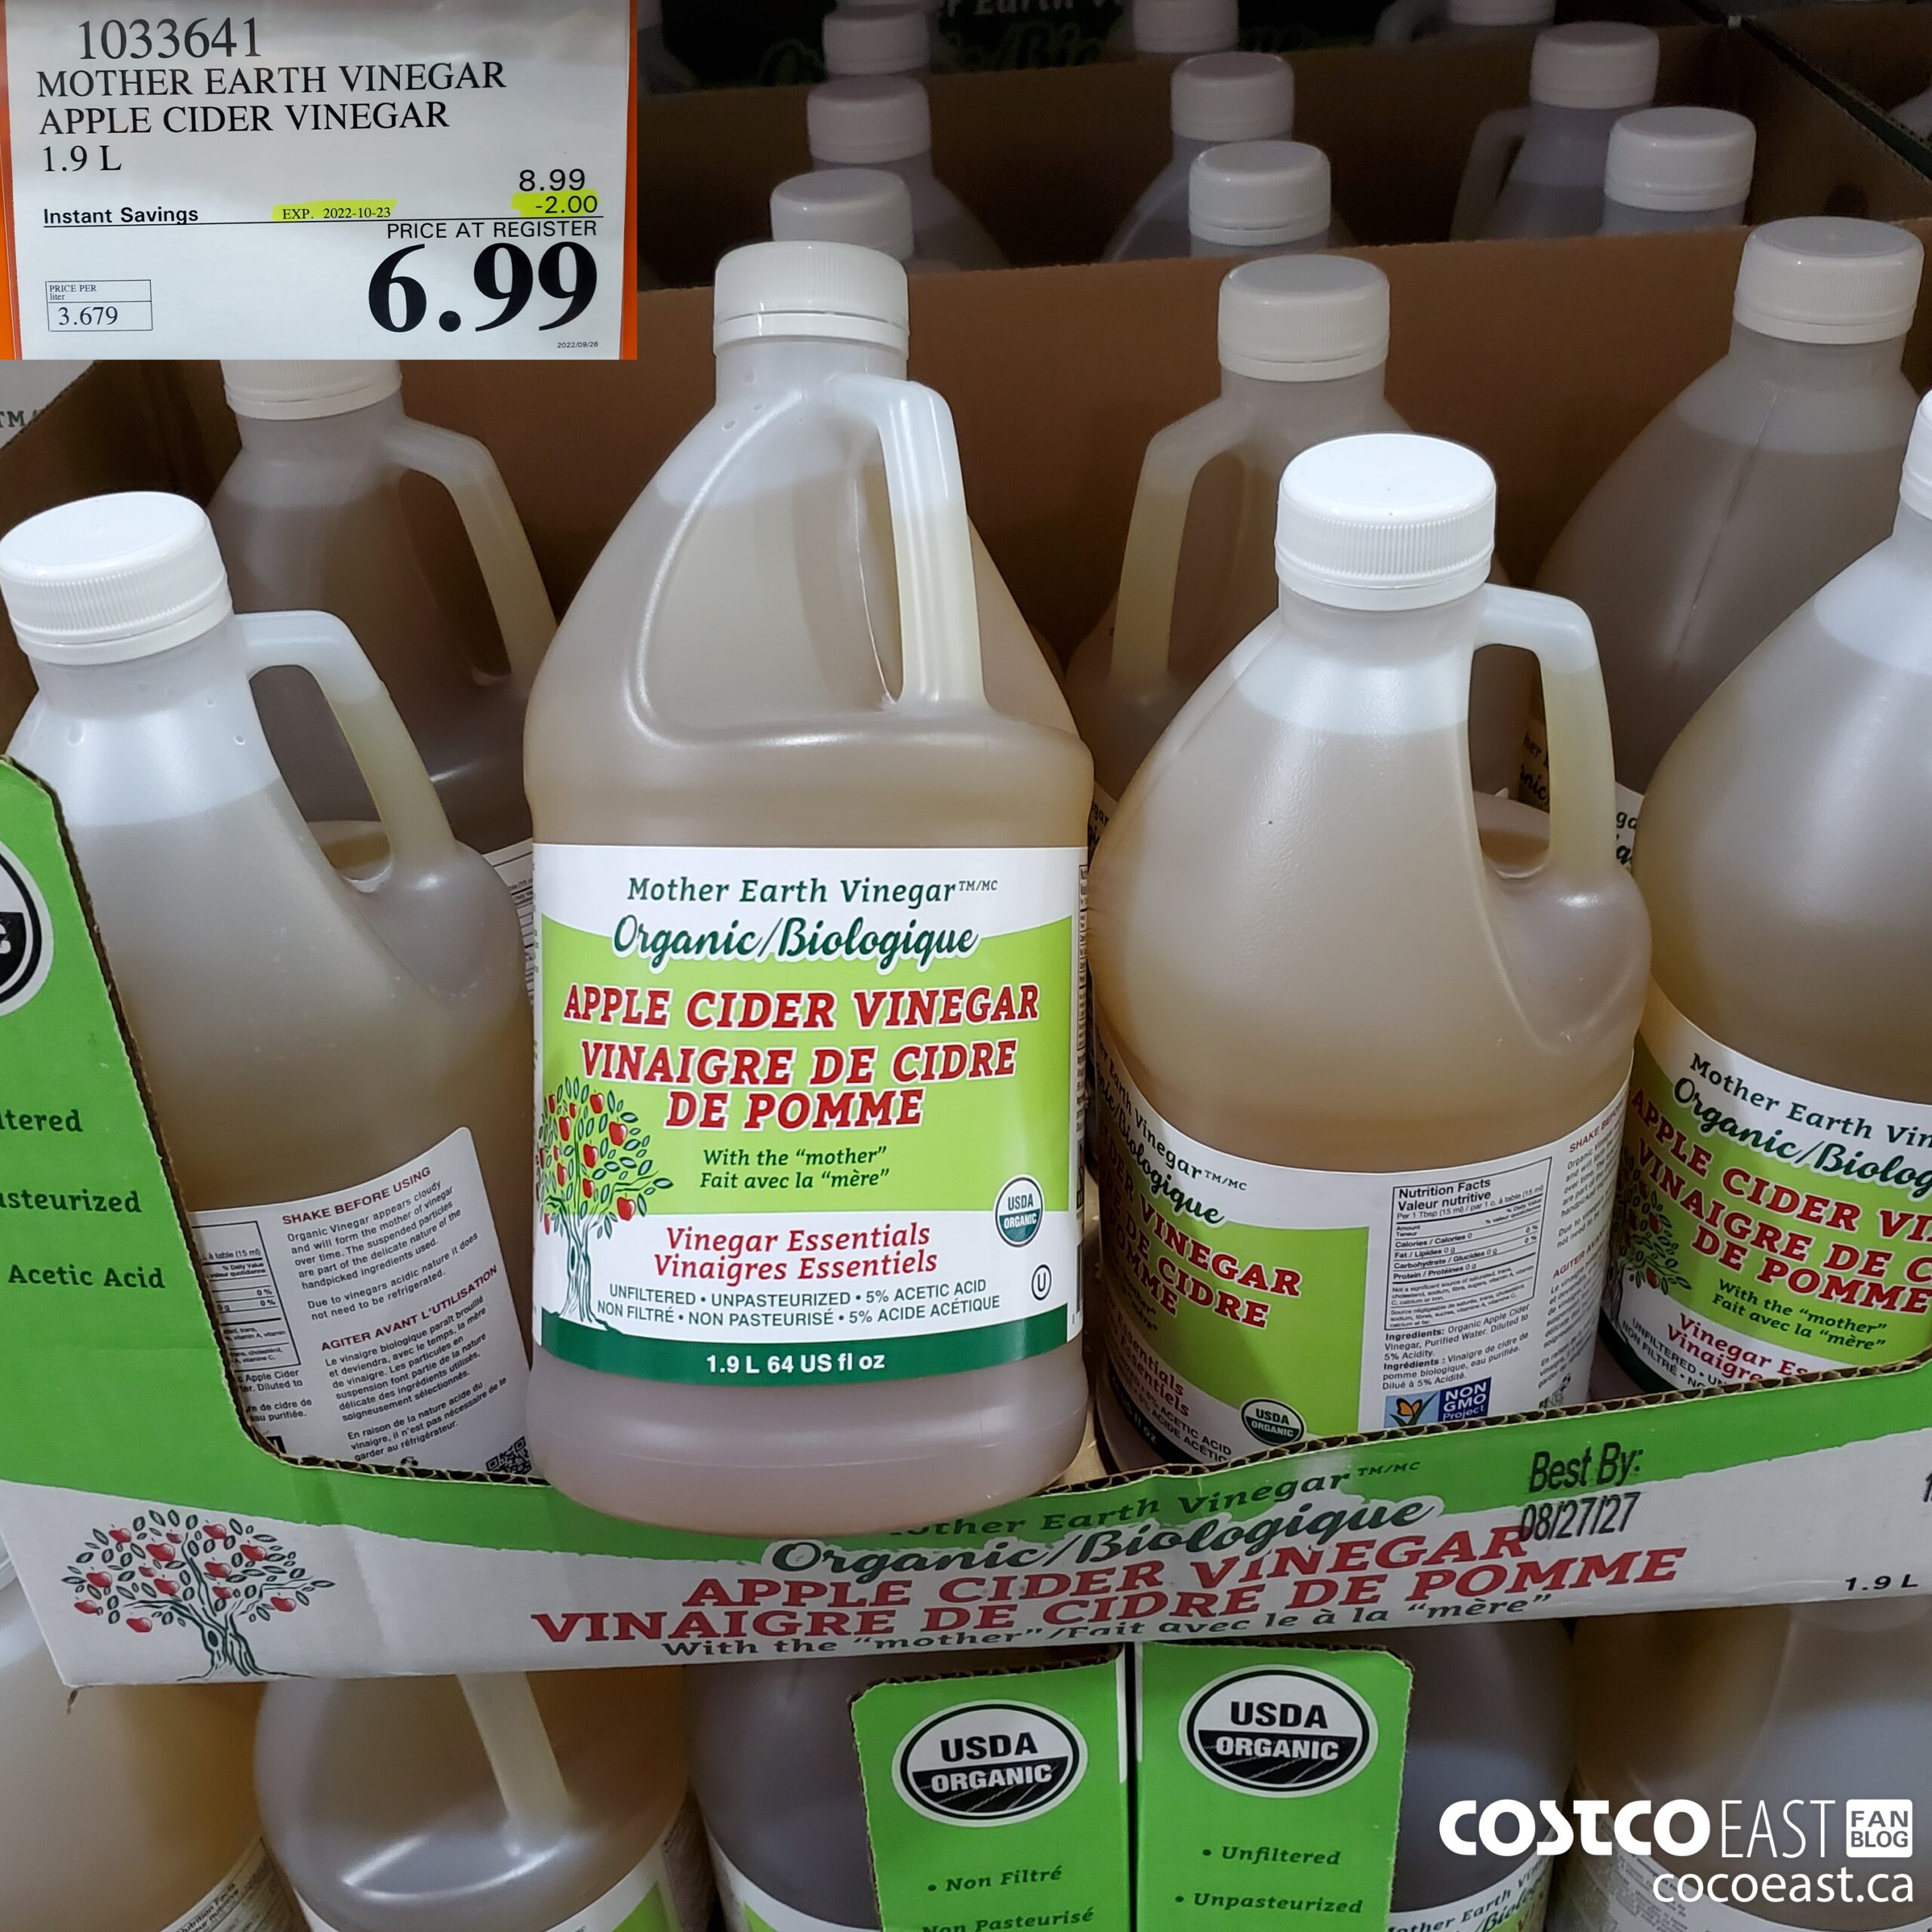 Costco: Finish Jet-Dry Rinse Aid LARGE 32 Ounce Bottles ONLY $4.99 Each +  More